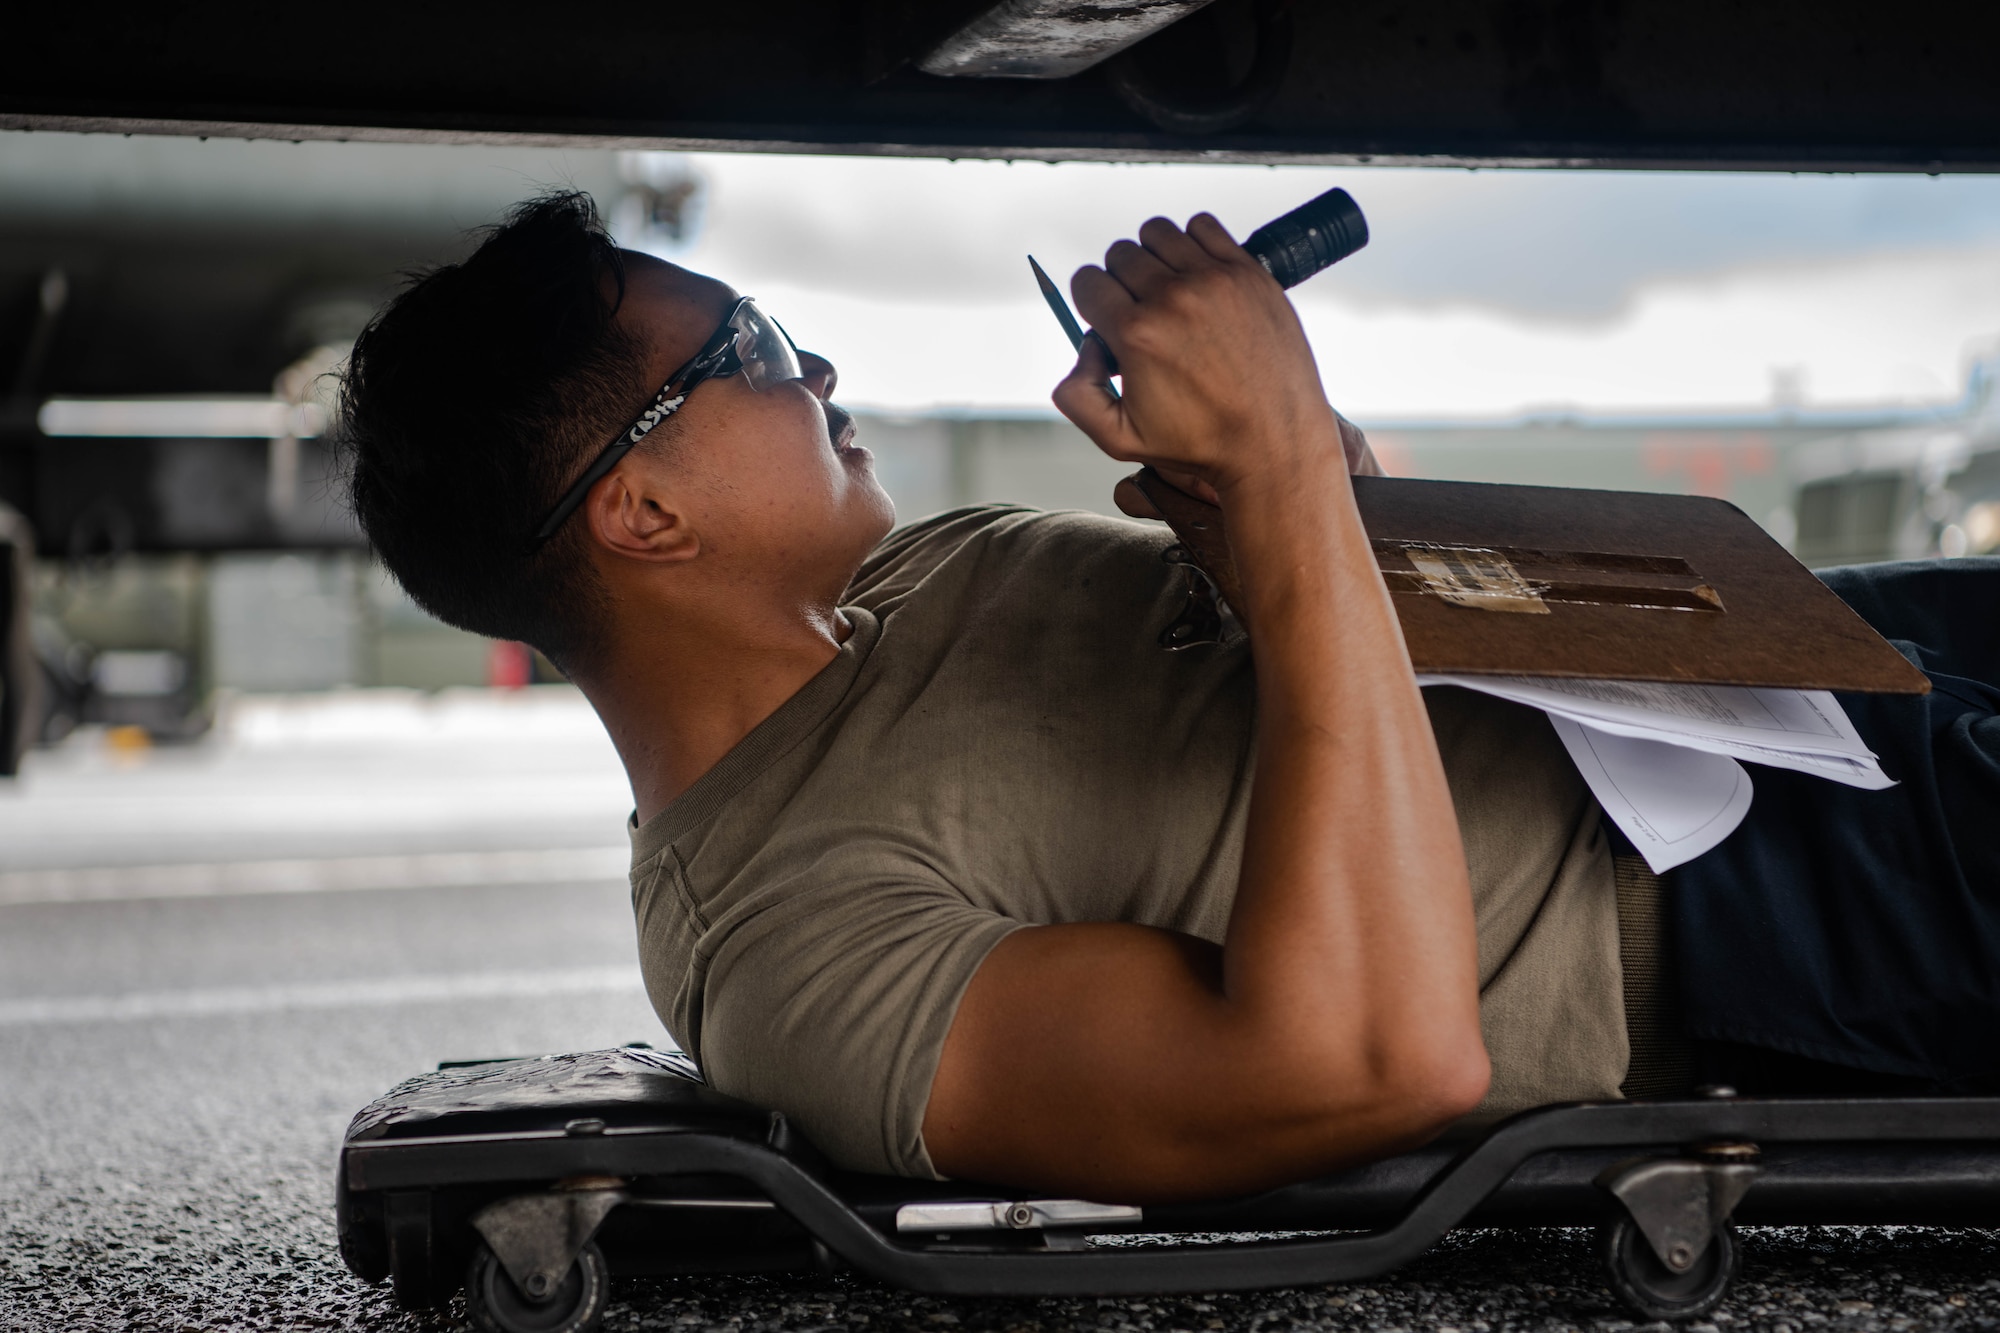 An Airman inspects the underside of a vehicle.